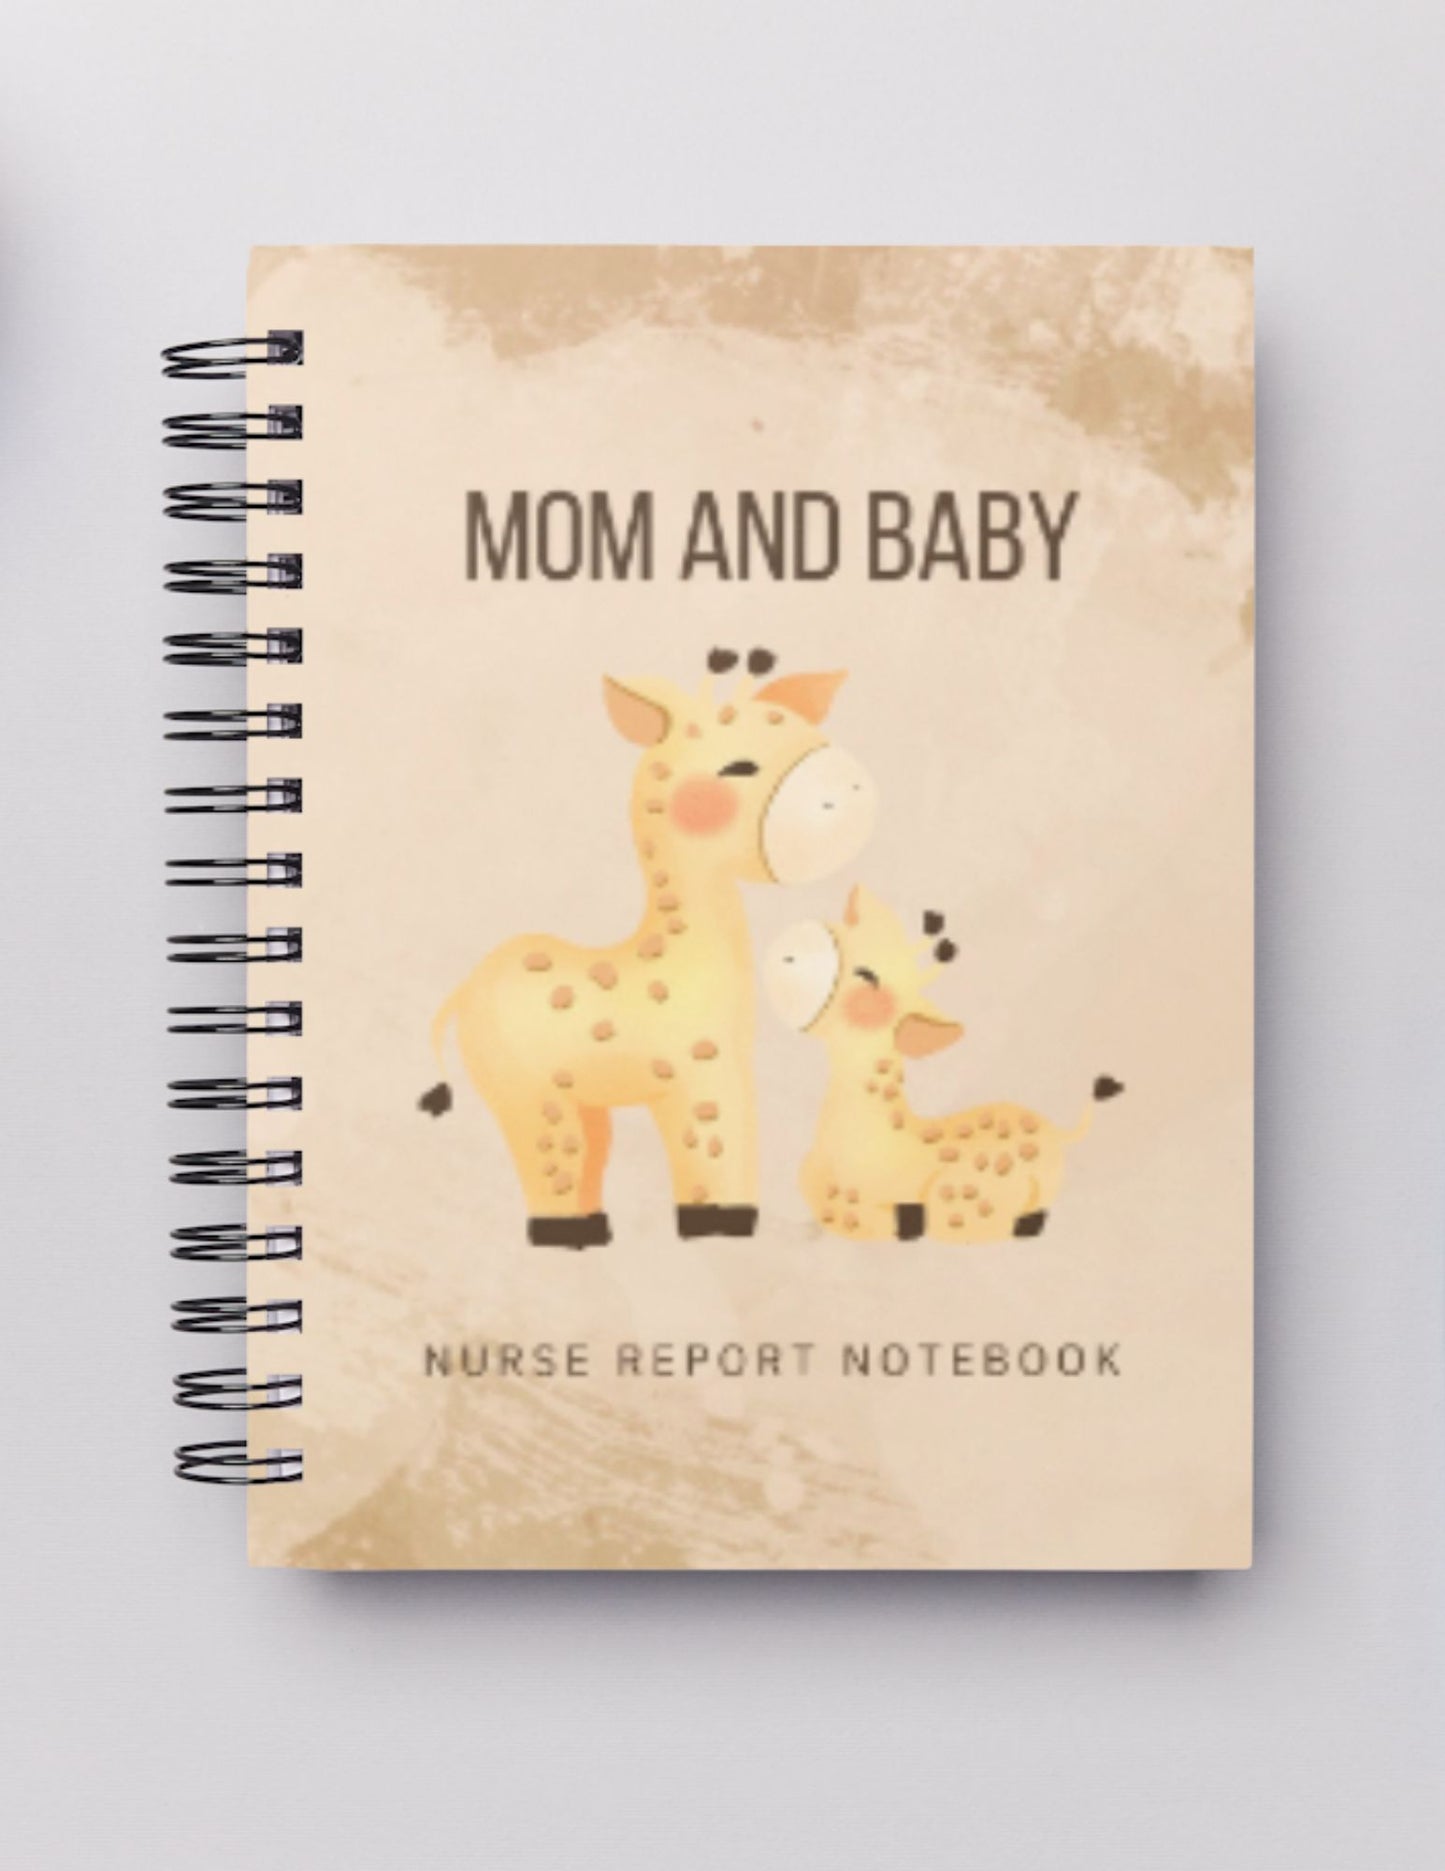 Mom and Baby (2 Couplets) Nurse Report Notebook